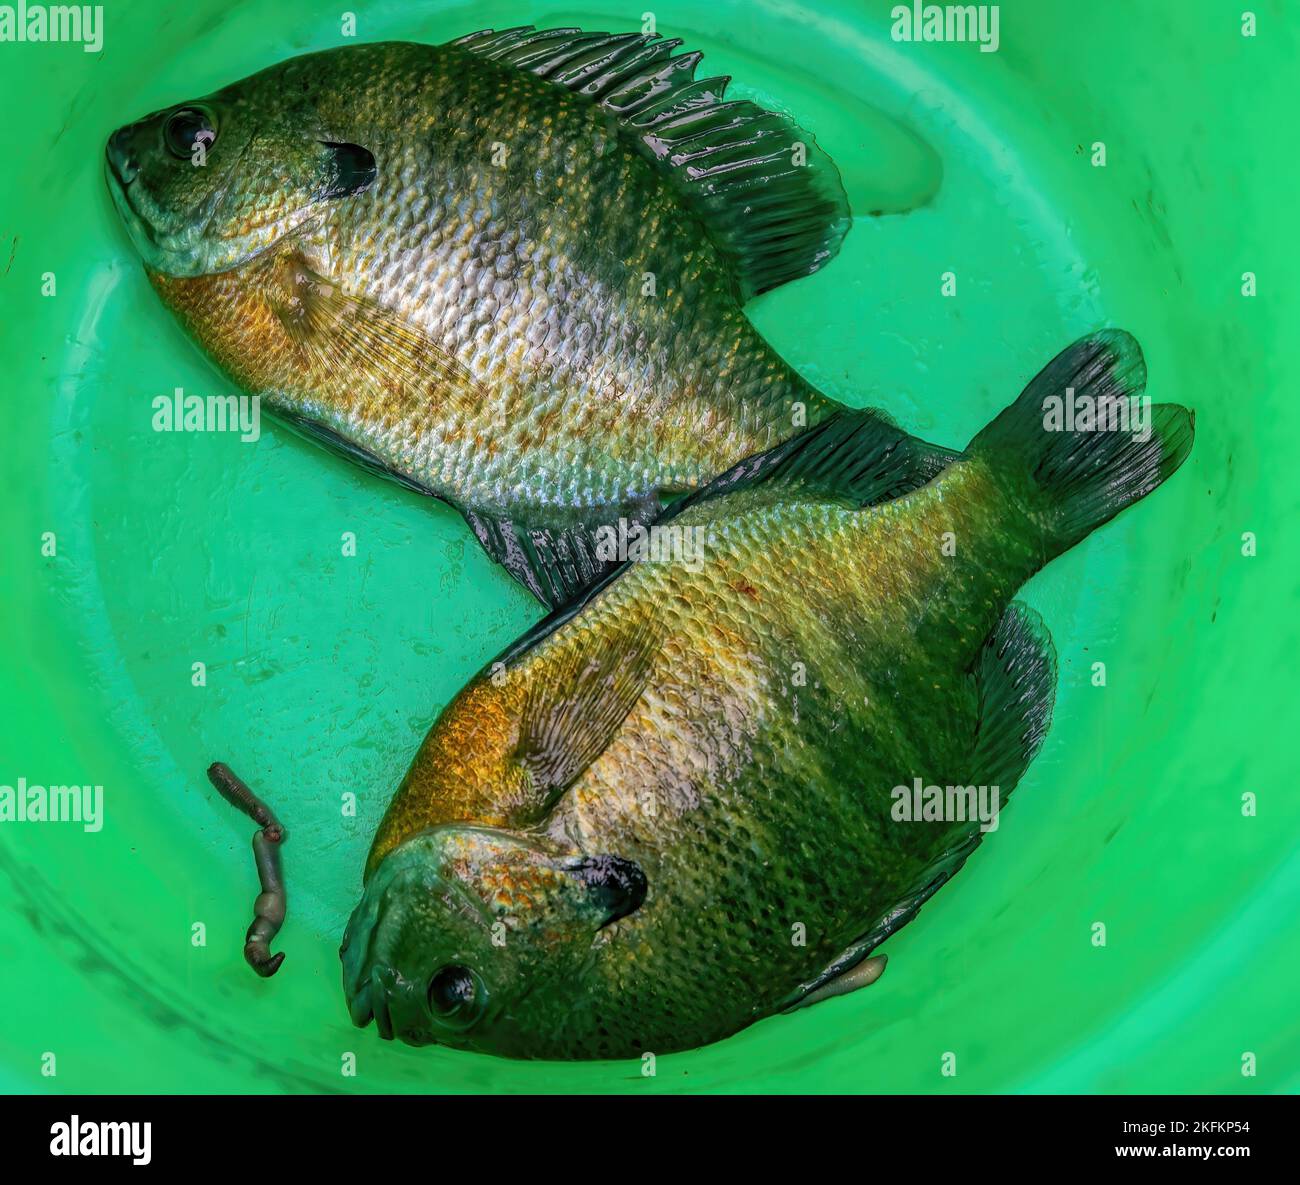 Two bluegill sunfish, a fisherman's catch, in a green pail with a